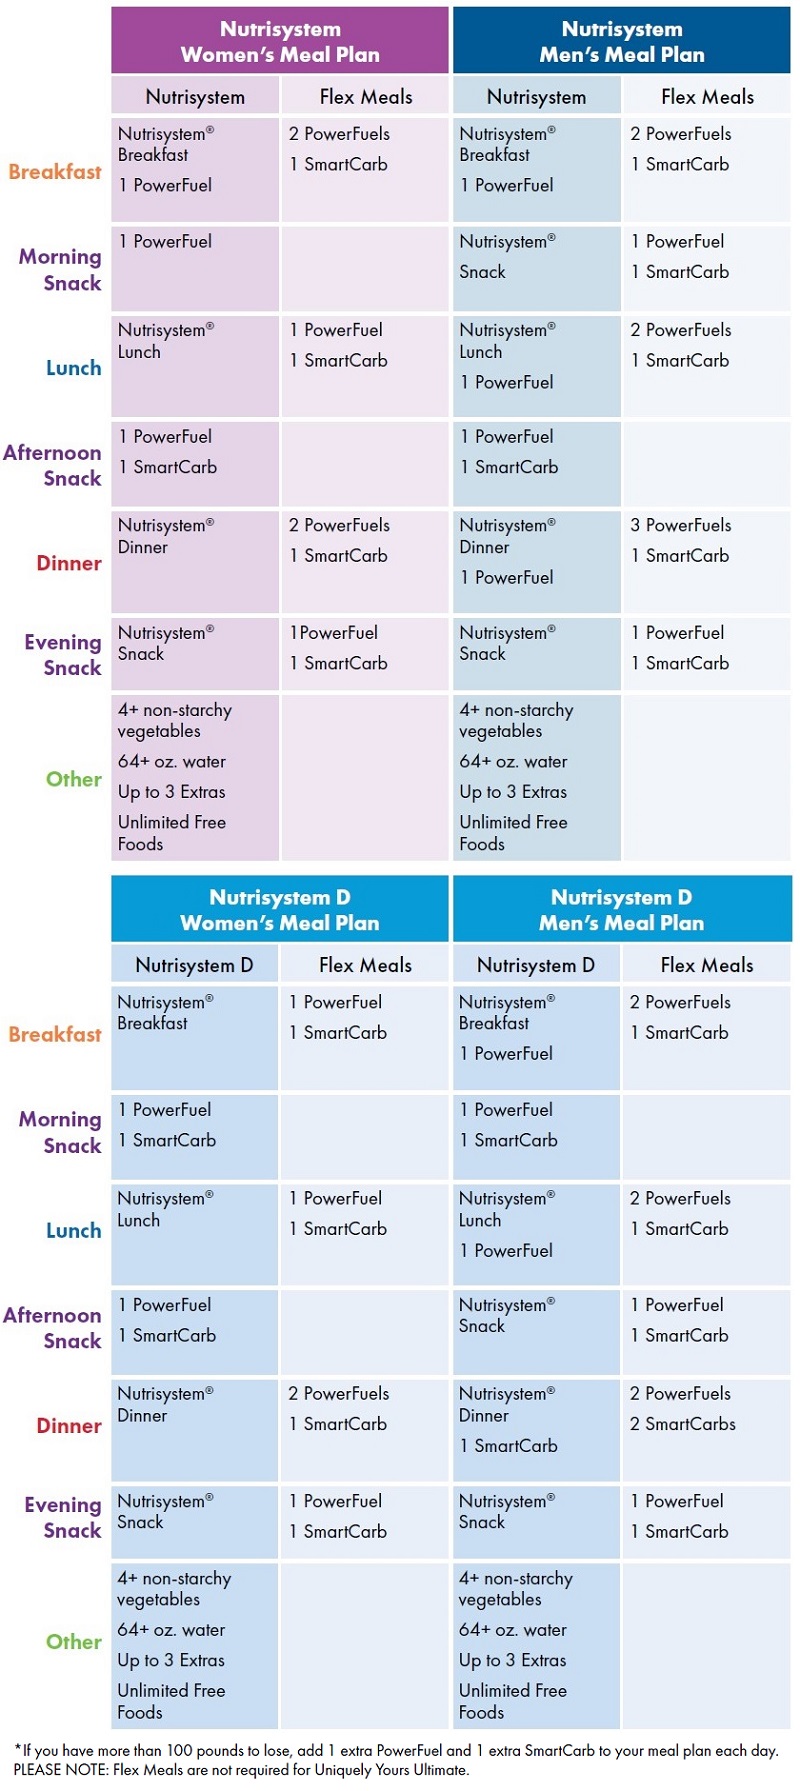 Nutrisystem meal plans for standard and diabetes plans